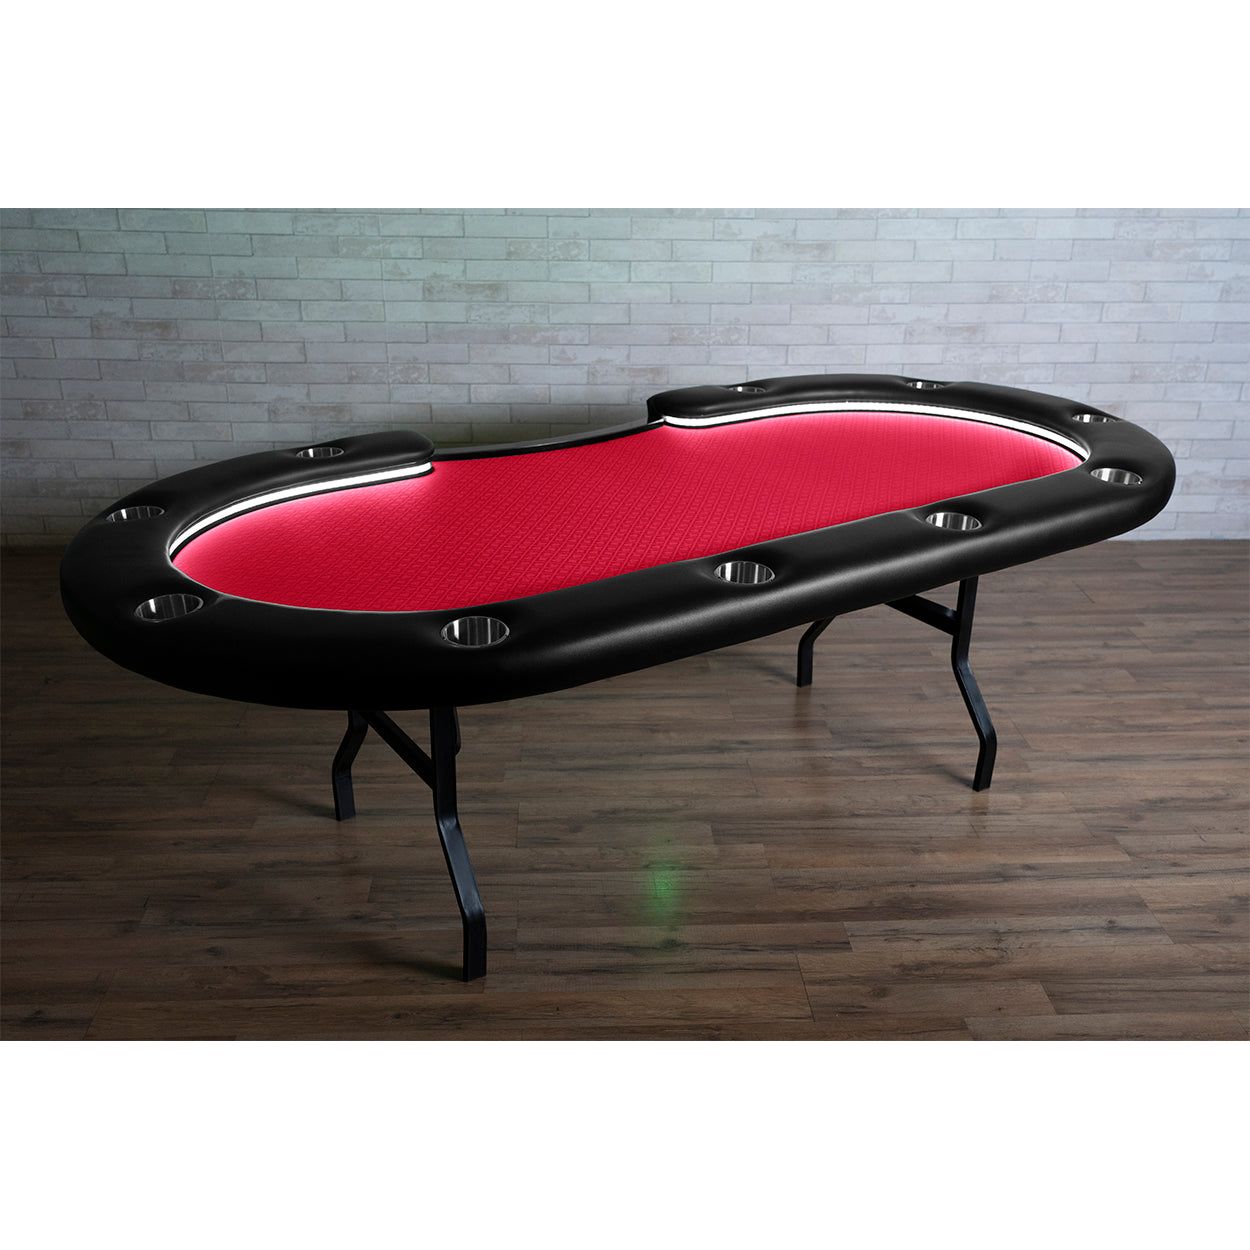 Folding poker table with LEDs, sturdy leg construction, and a red game top.